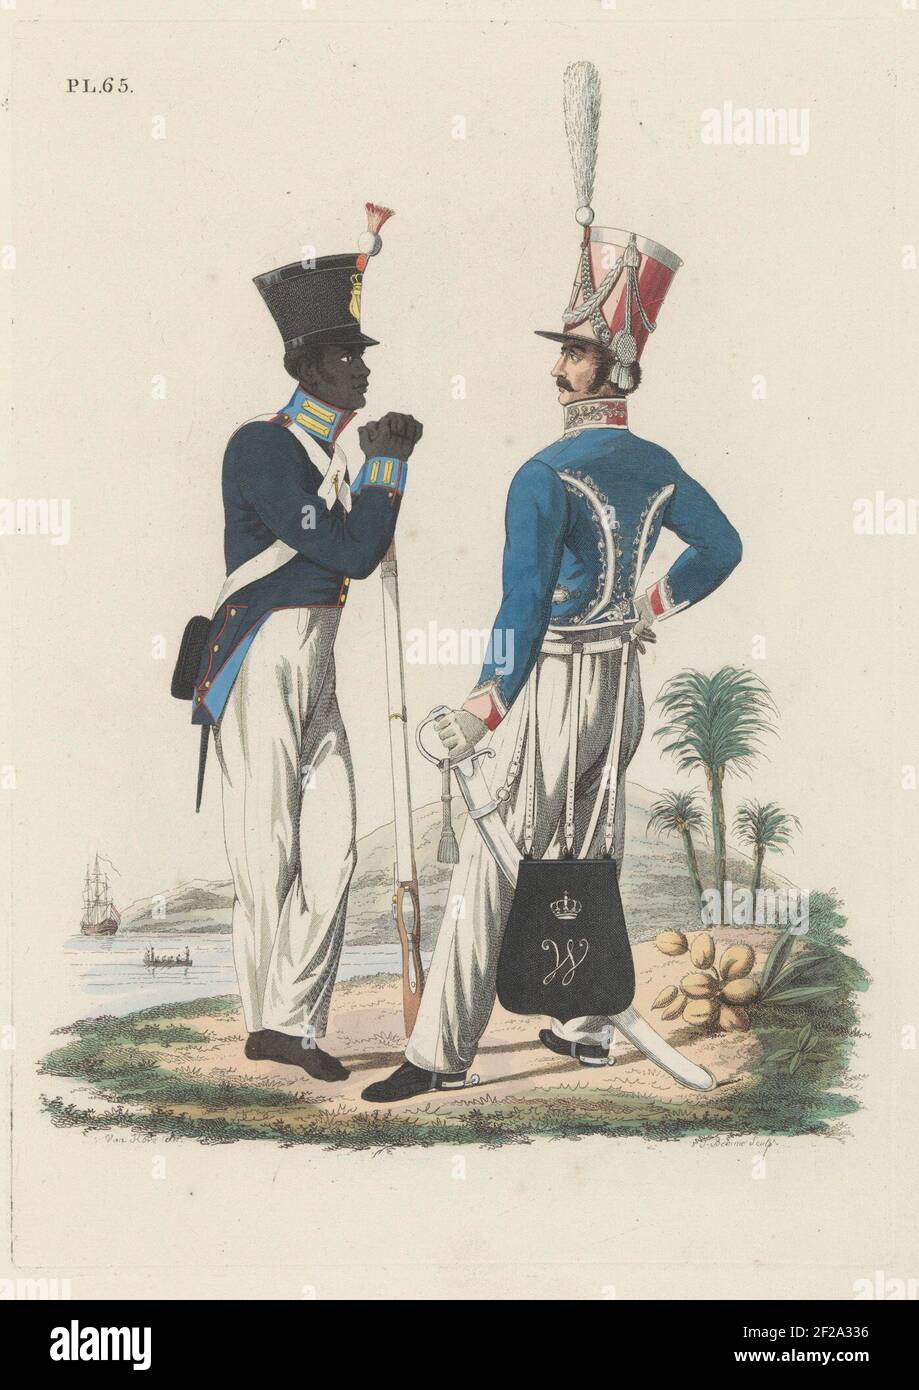 Hussaar, te voet, van het Reg. no. 7, en Infanterist (Inlander). Troepen in de Oost-Indiën.A Dutch hussar of the Hussaren Regiment No. 7 And a native infantryman barefoot. Of the Dutch troops in East Indies. Plate 65. The two standing on the waterfront. Uniform presentation in 'Continued from the description of the Royal Dutch troops' of J.F. Teupking, 1826. Stock Photo